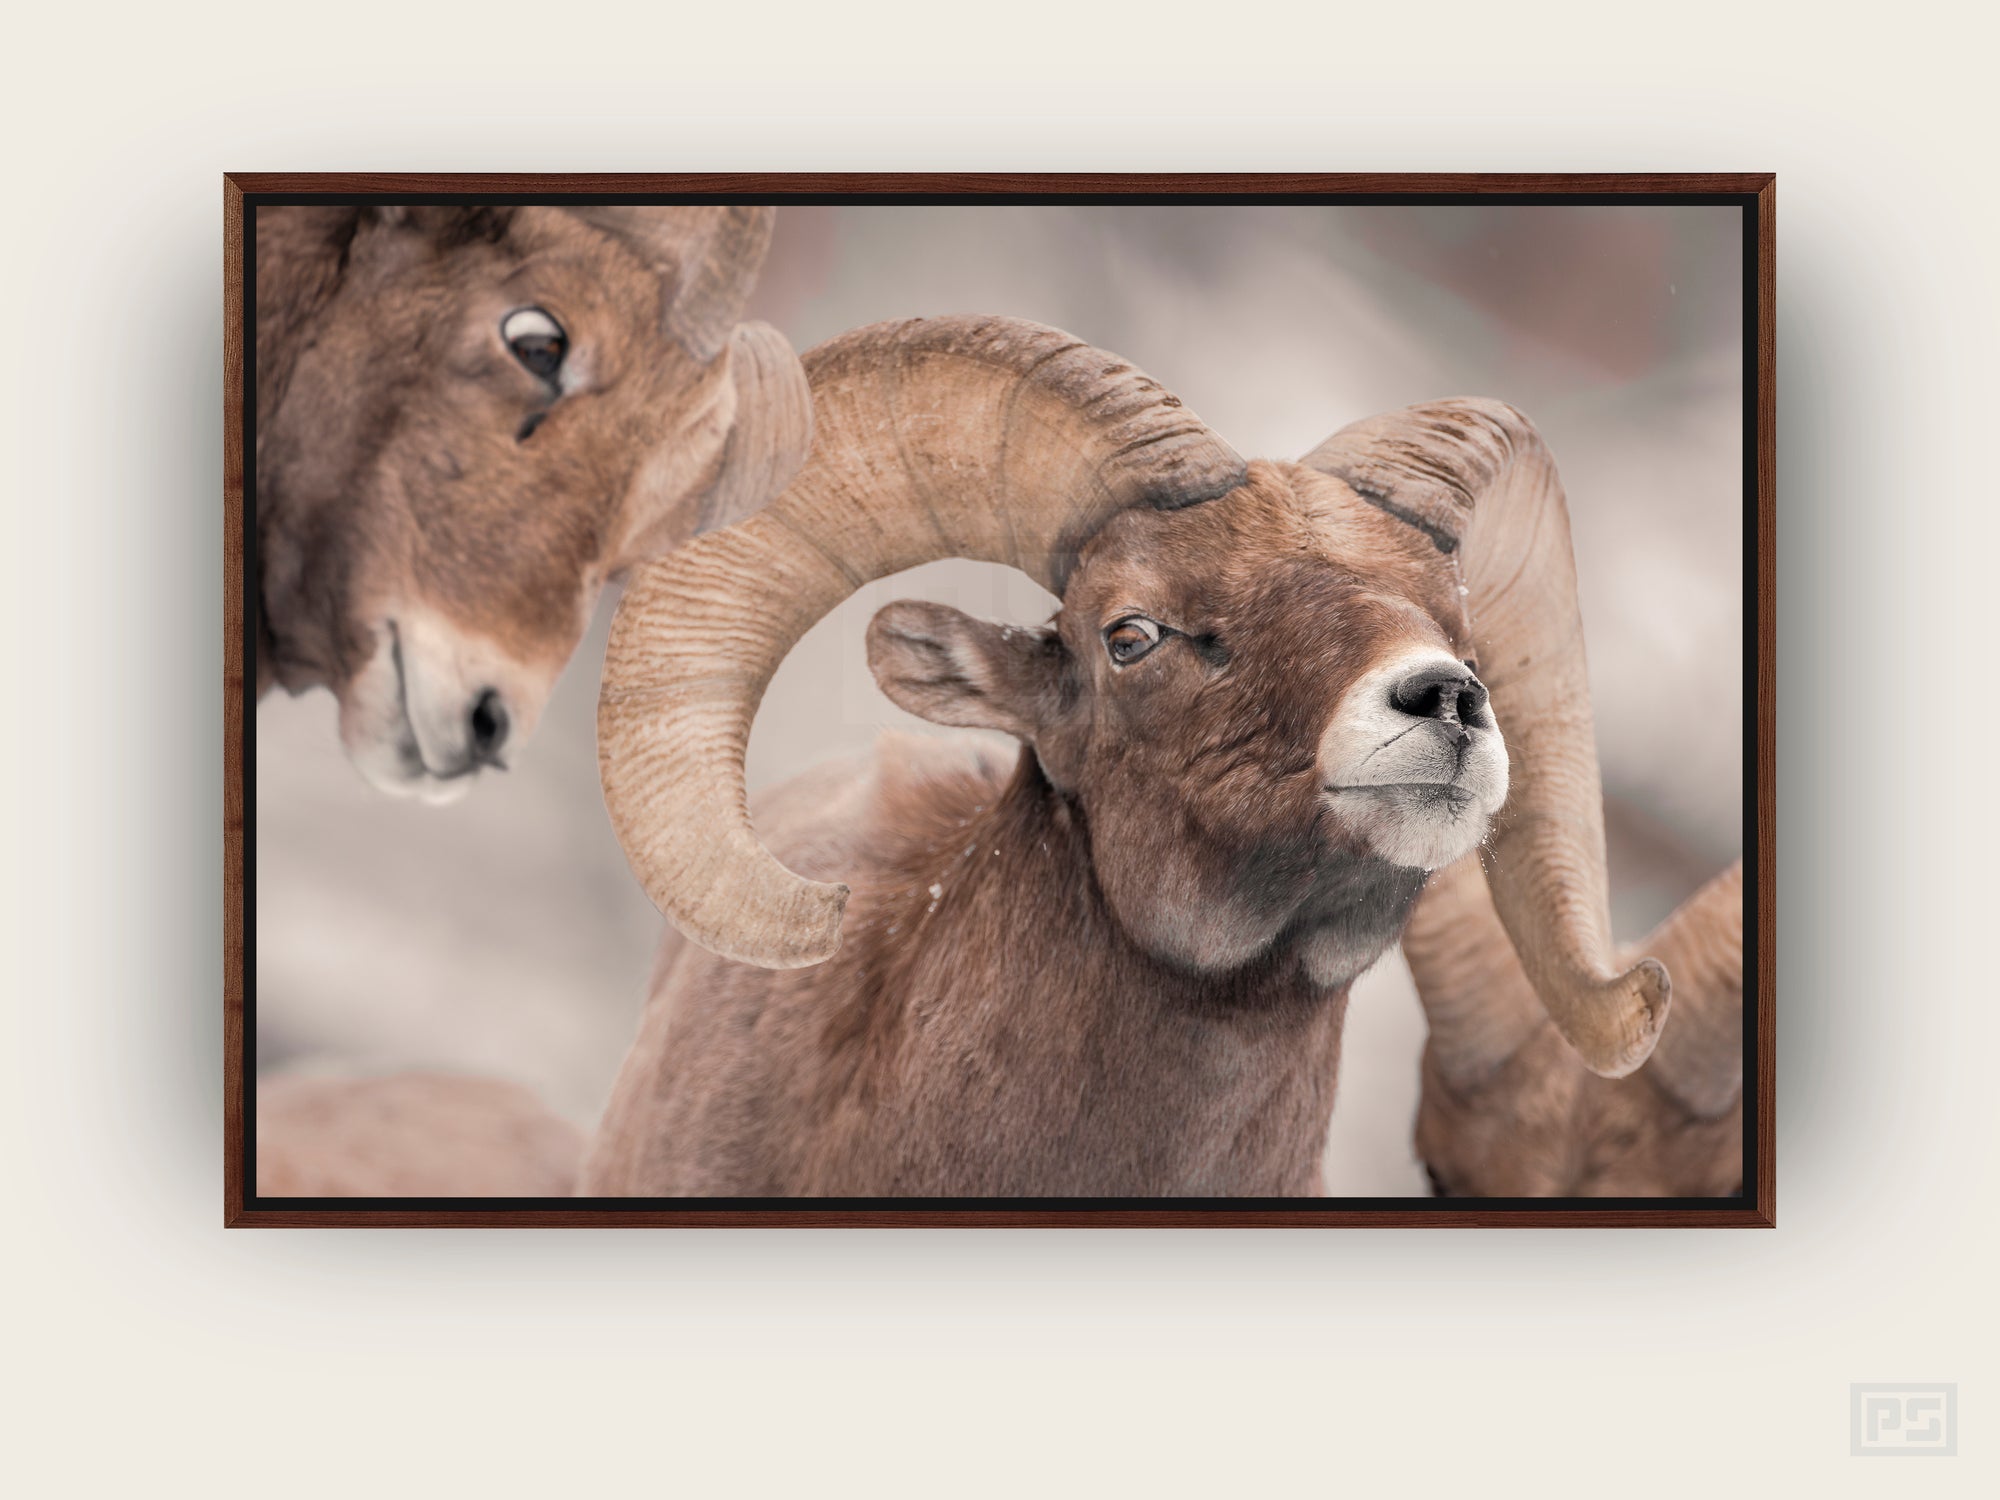 Framed Canvas Print "The Ram - Prepare for Impact"